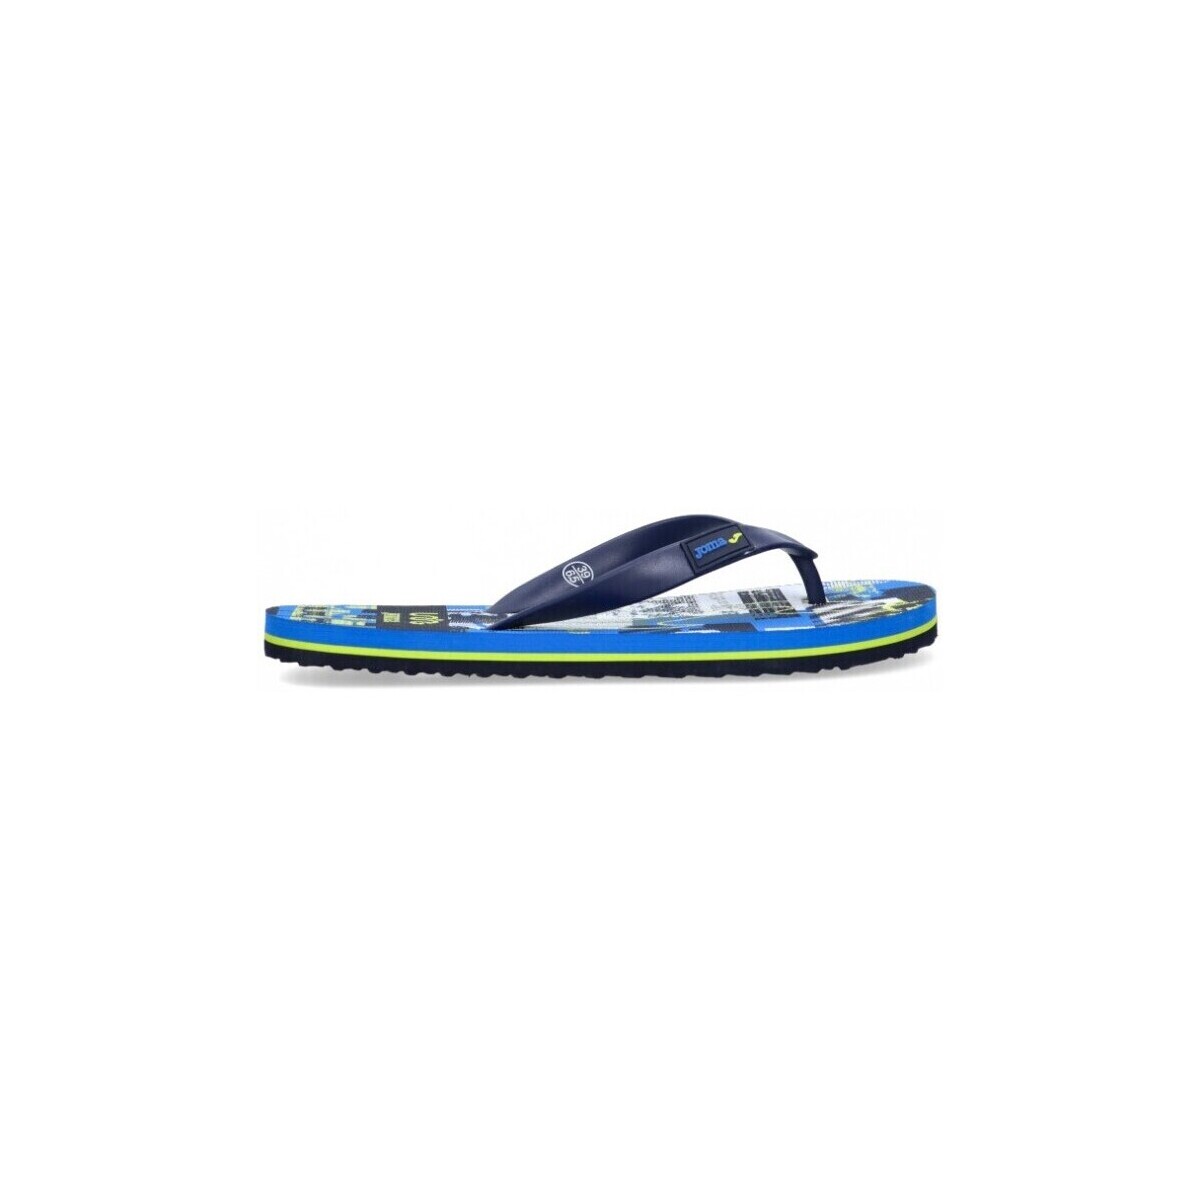 Chaussures Homme Tongs Joma 69050 Bleu